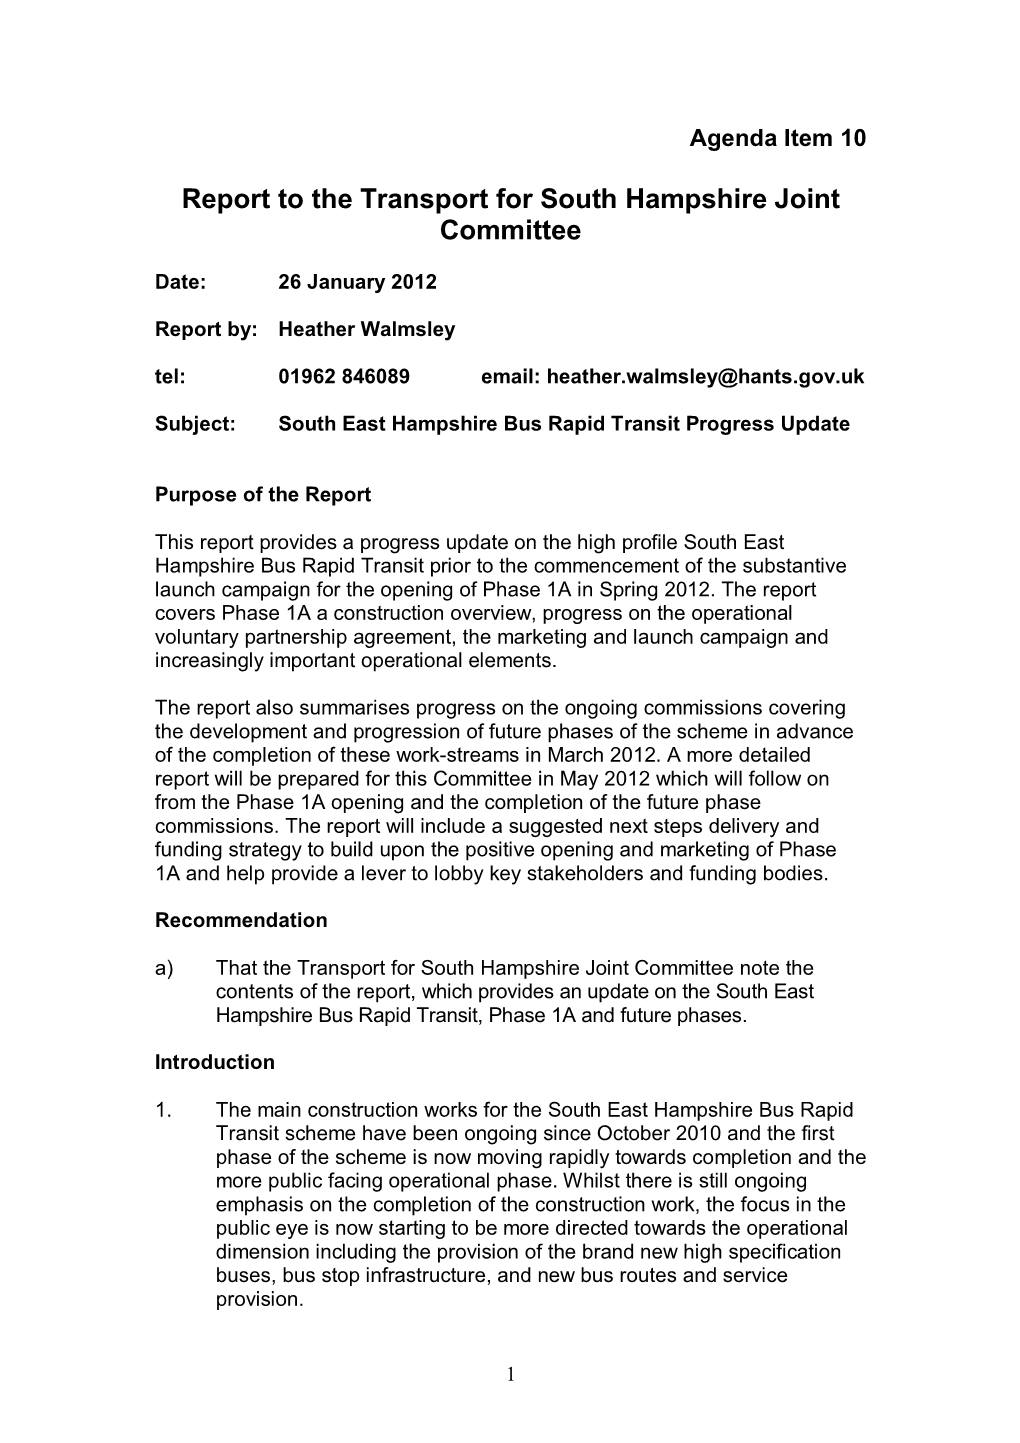 Report to the Transport for South Hampshire Joint Committee